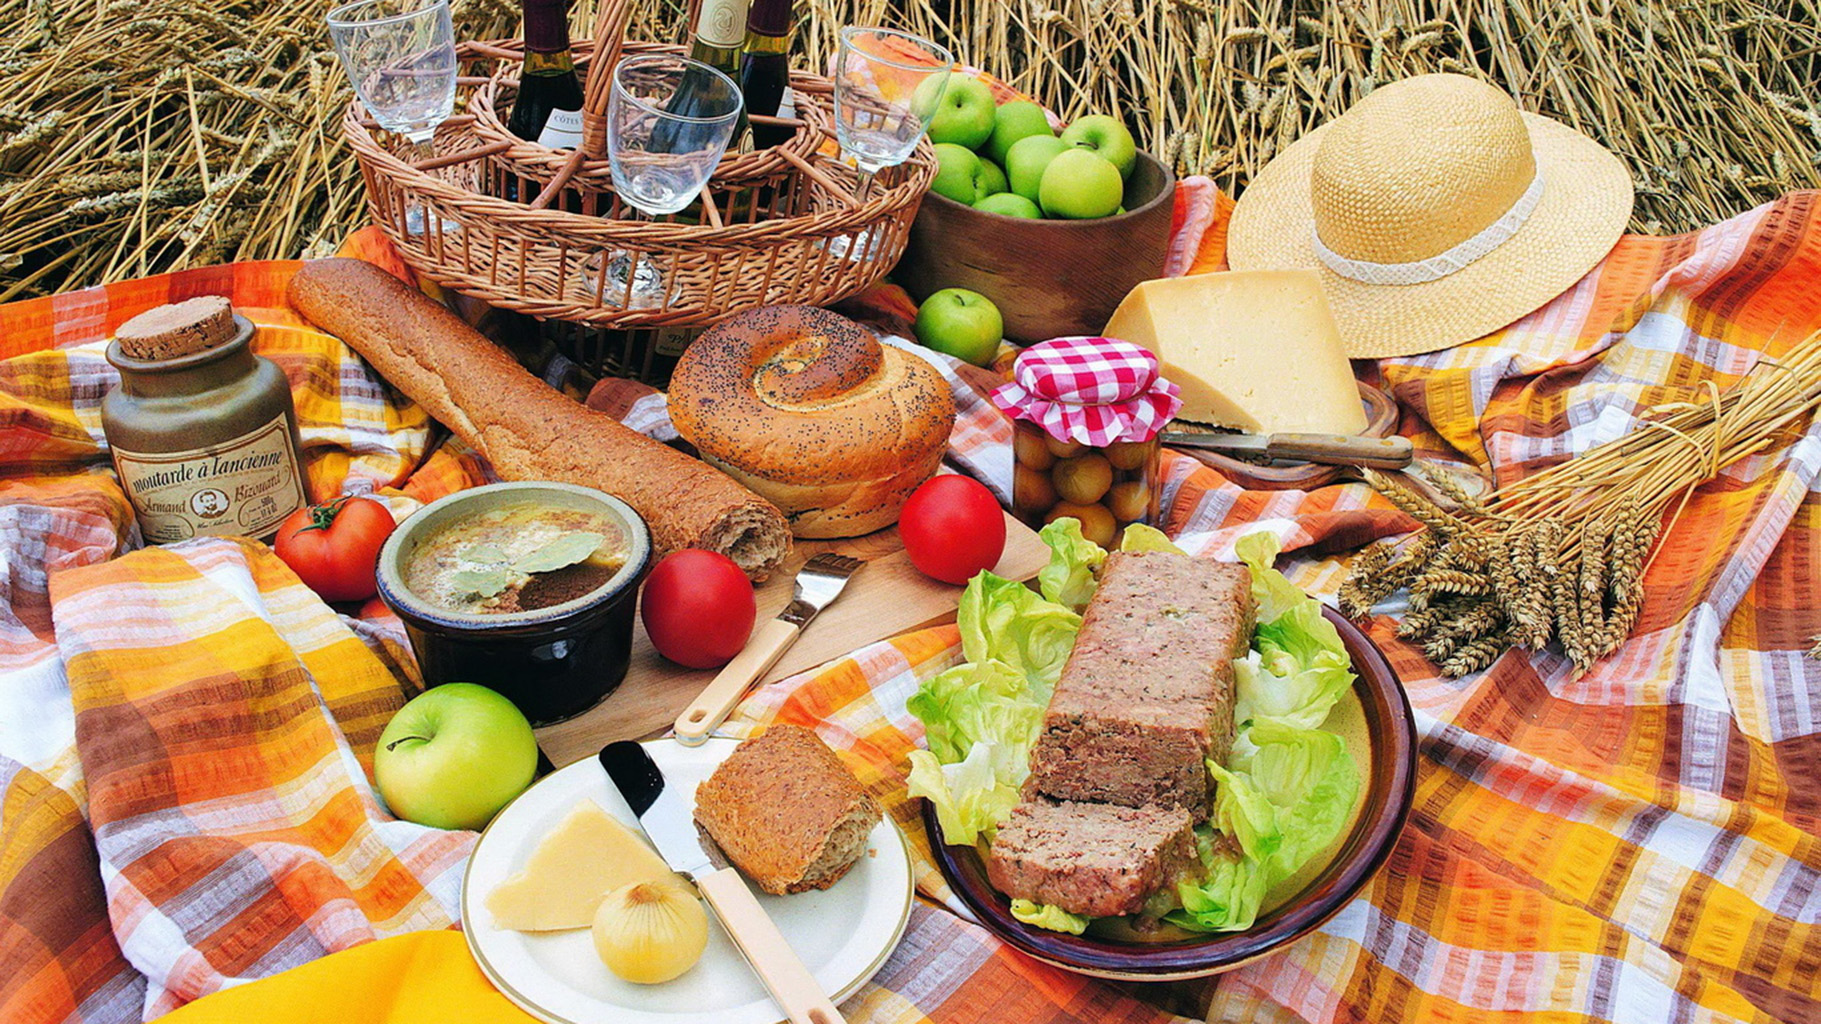 These Food and Drink Pairings will make any picnic a success - Yahire